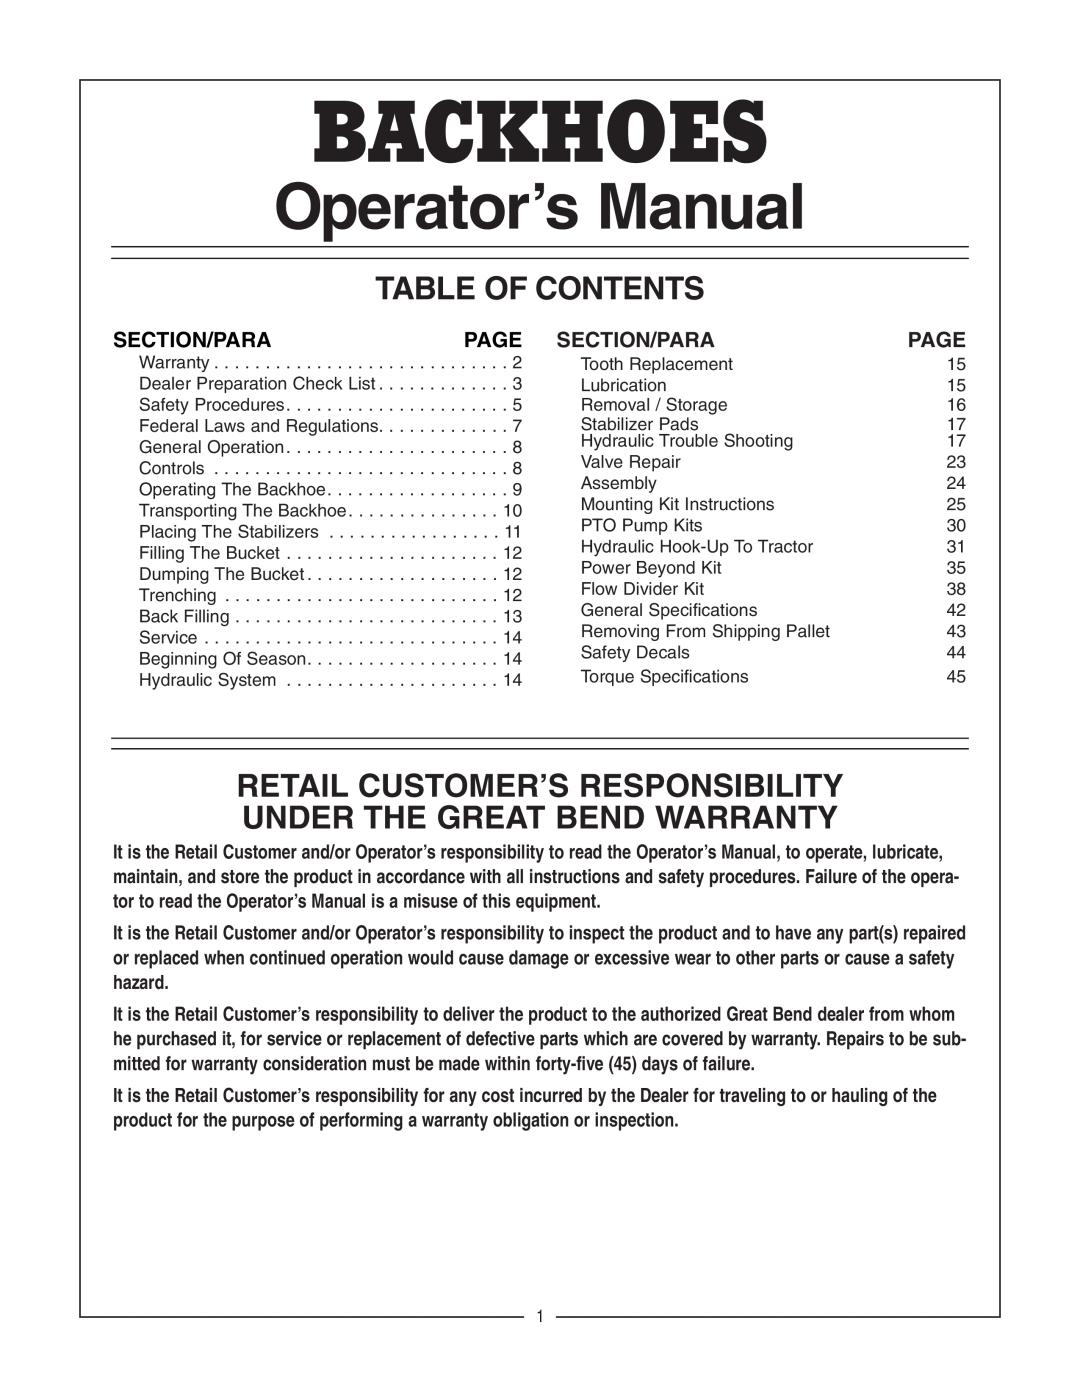 Bush Hog 2165 manual Table Of Contents, Retail Customer’S Responsibility Under The Great Bend Warranty, Section/Para, Page 